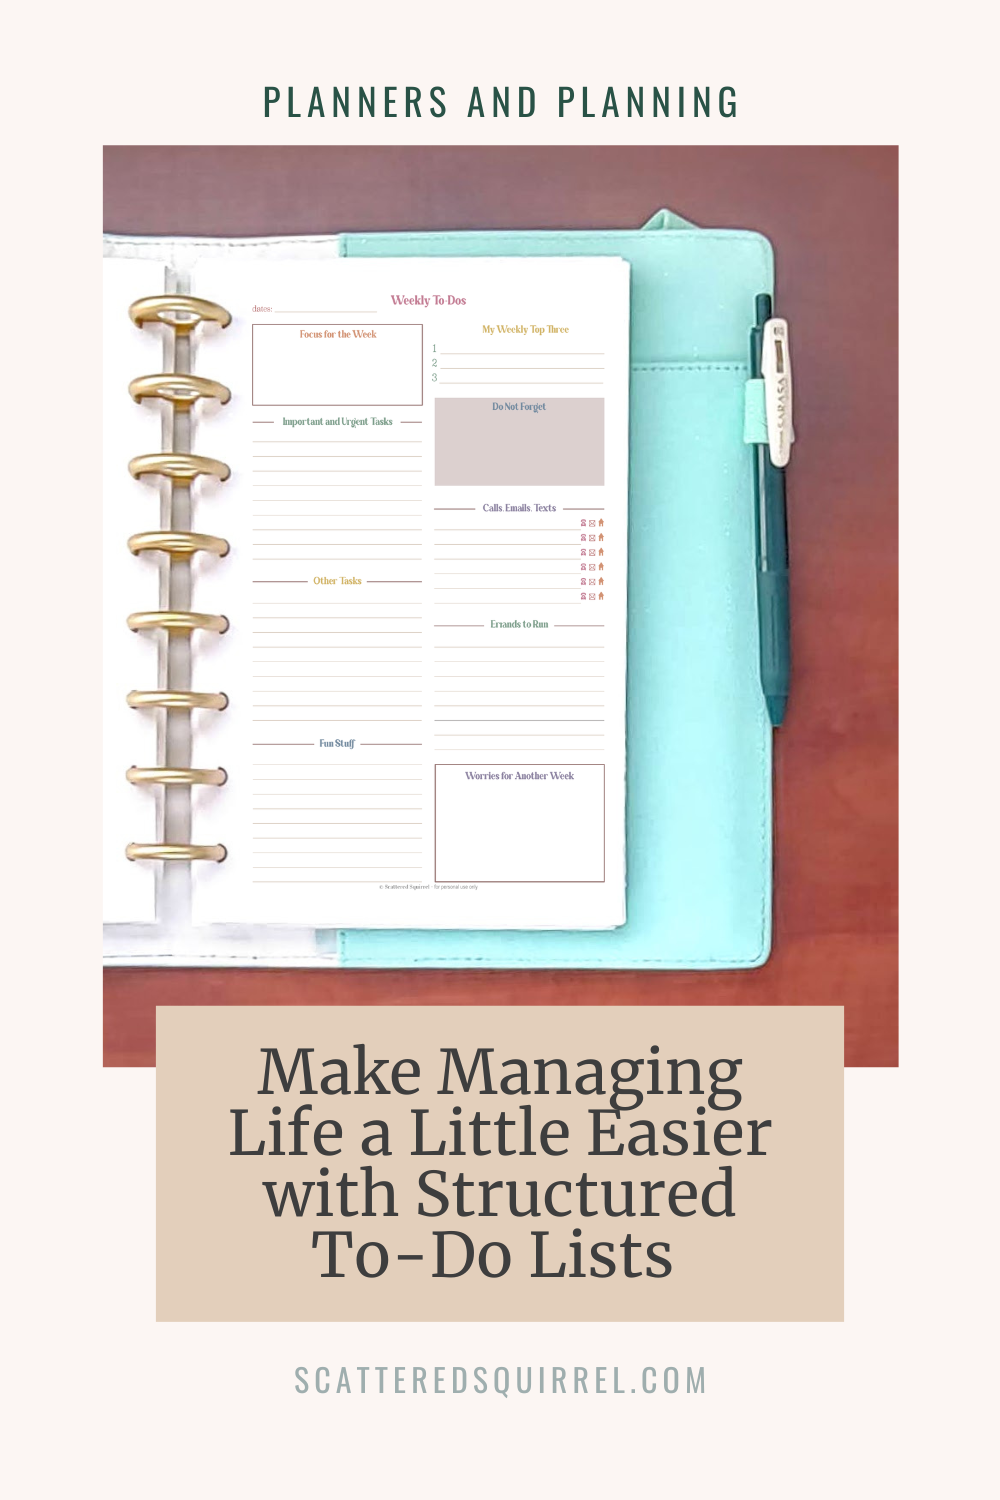 Utilize Structured To-do Lists to help Make Managing Life a Little Easier